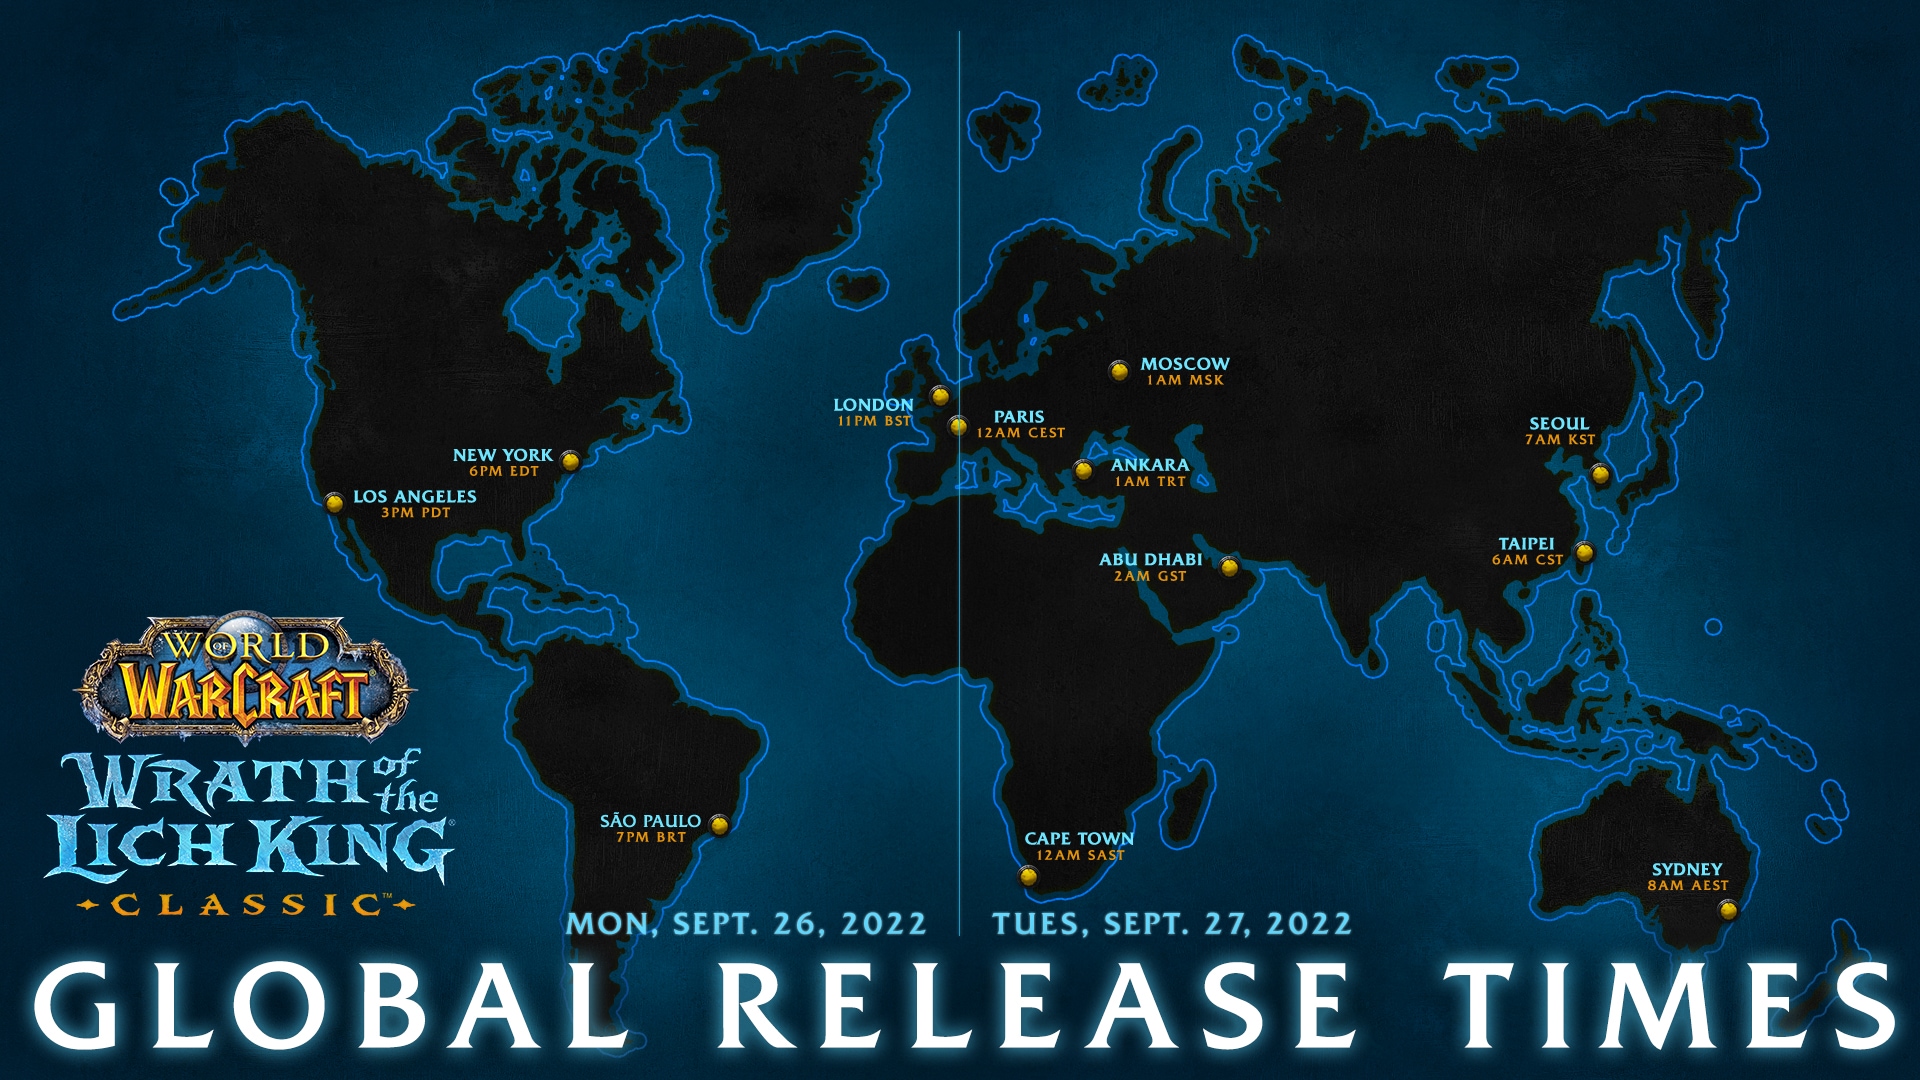 Global Release Times